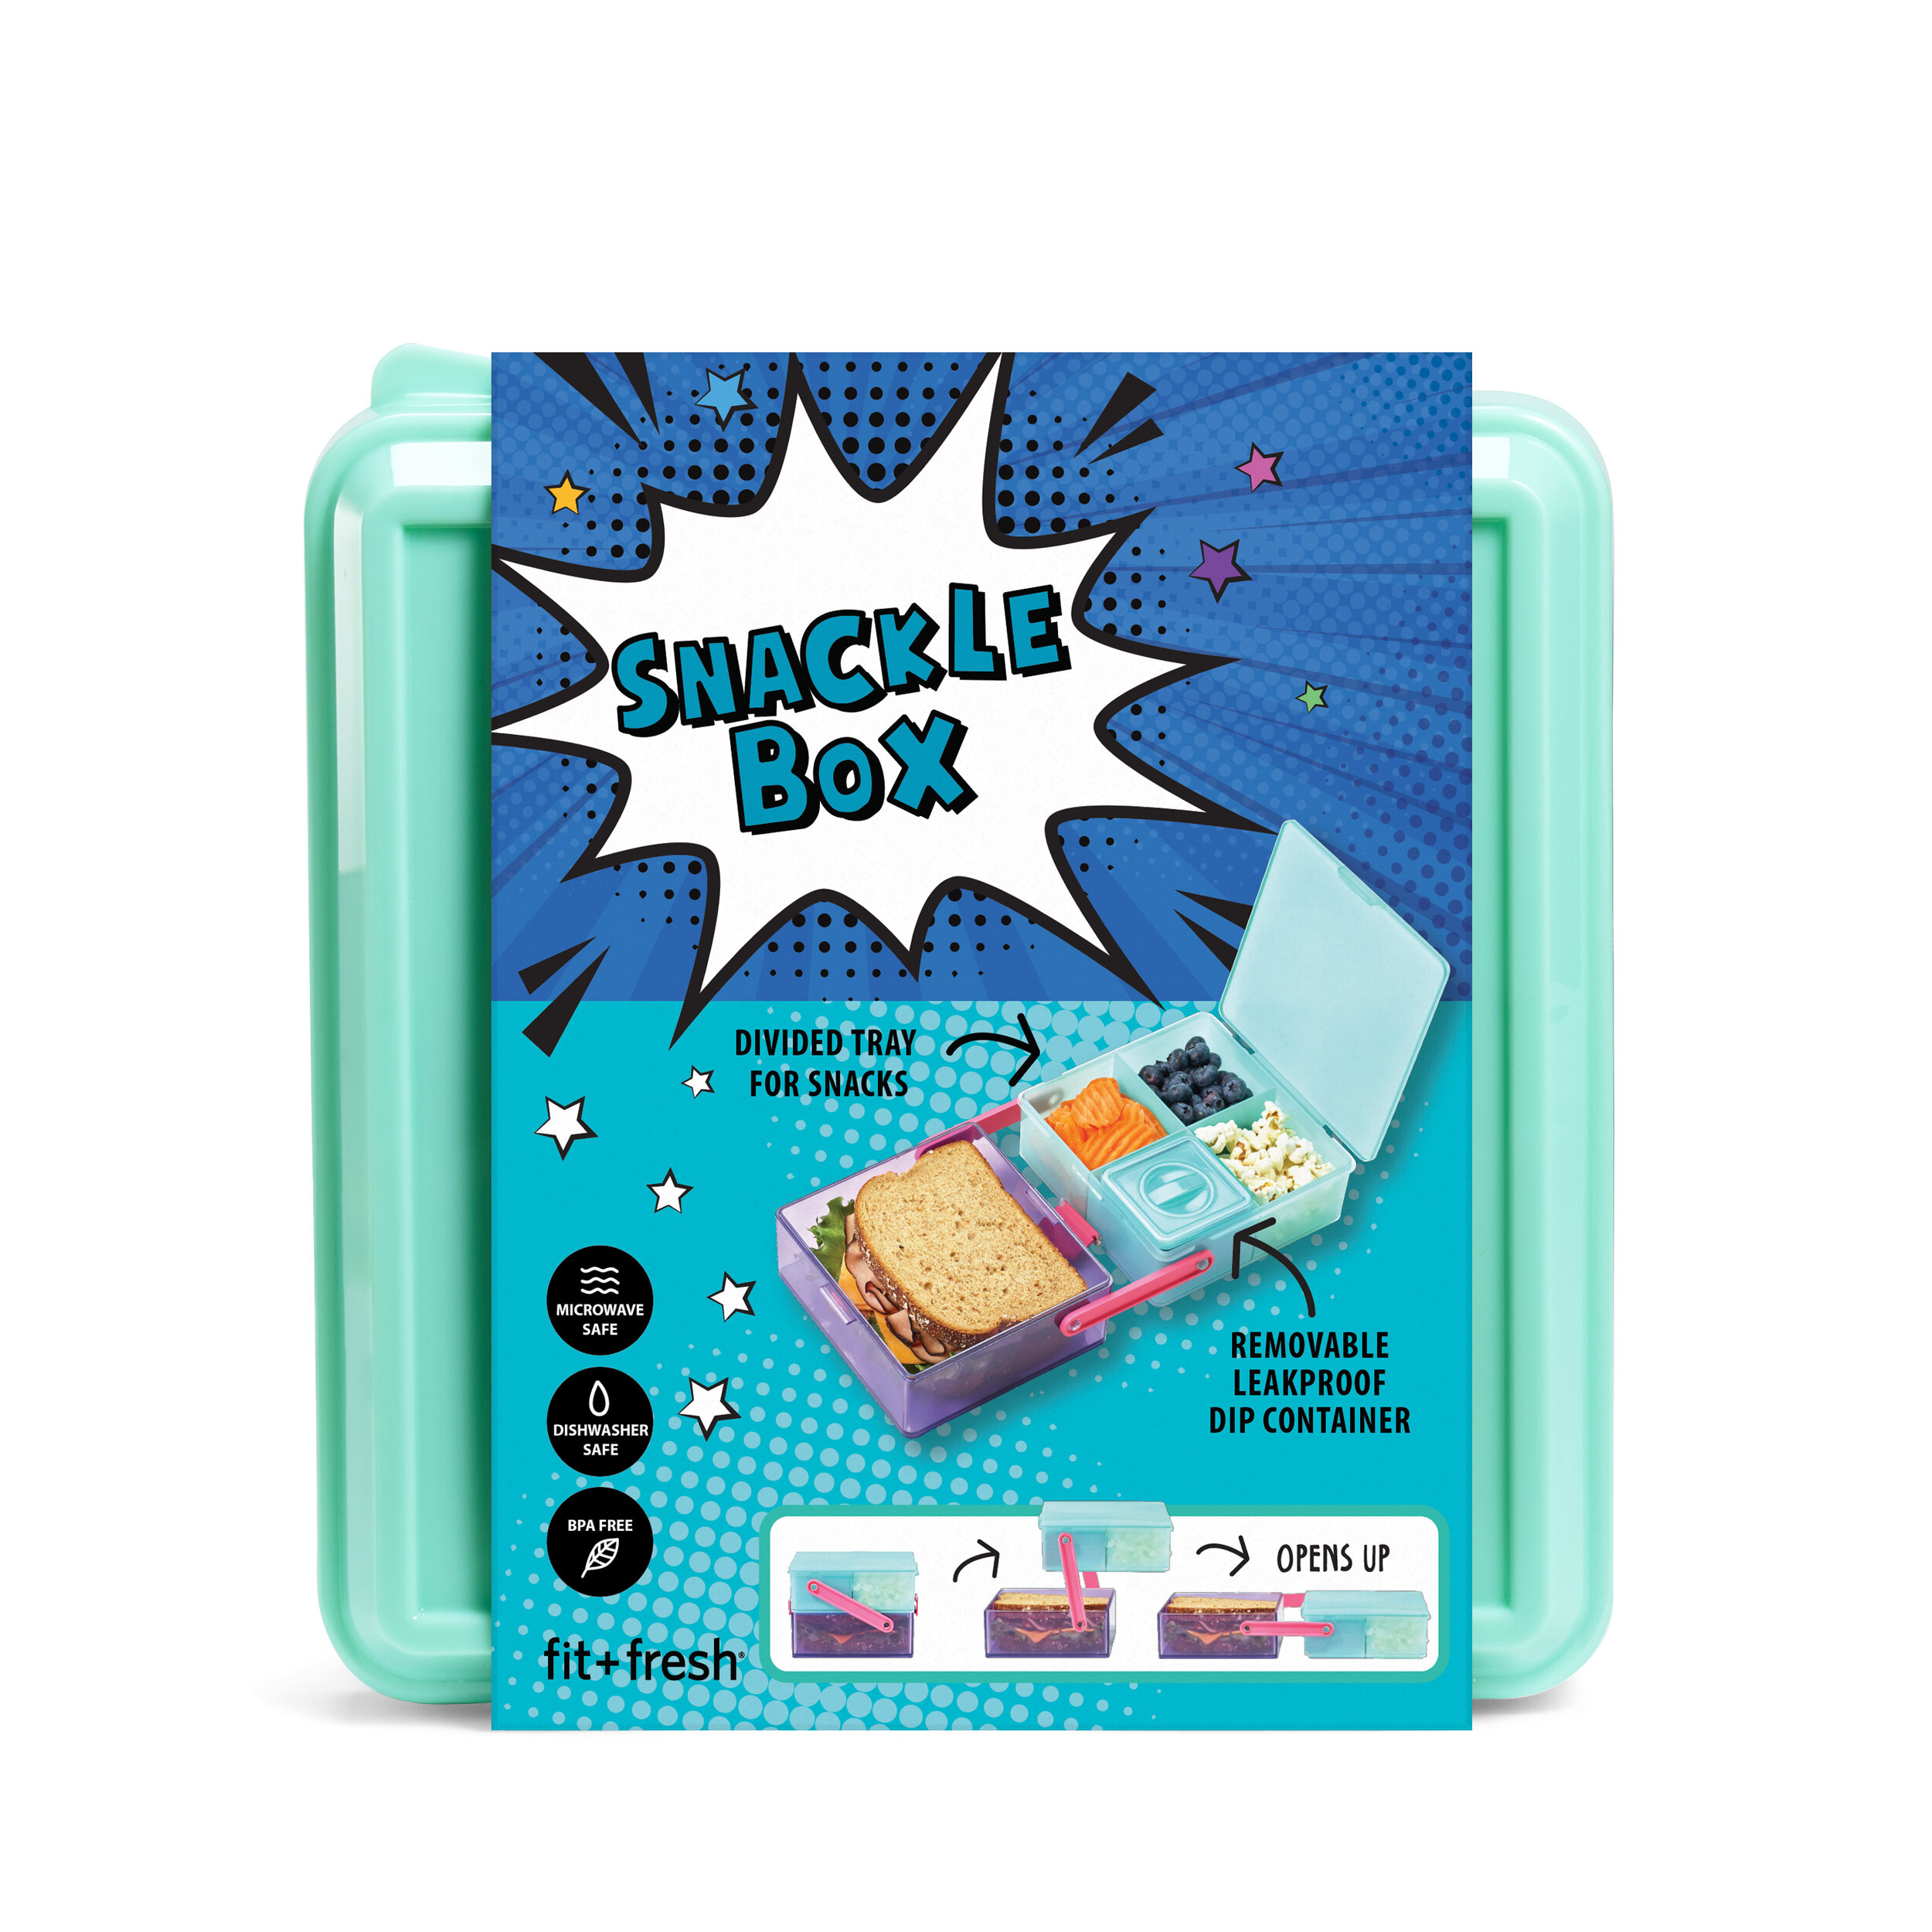 snackle box target